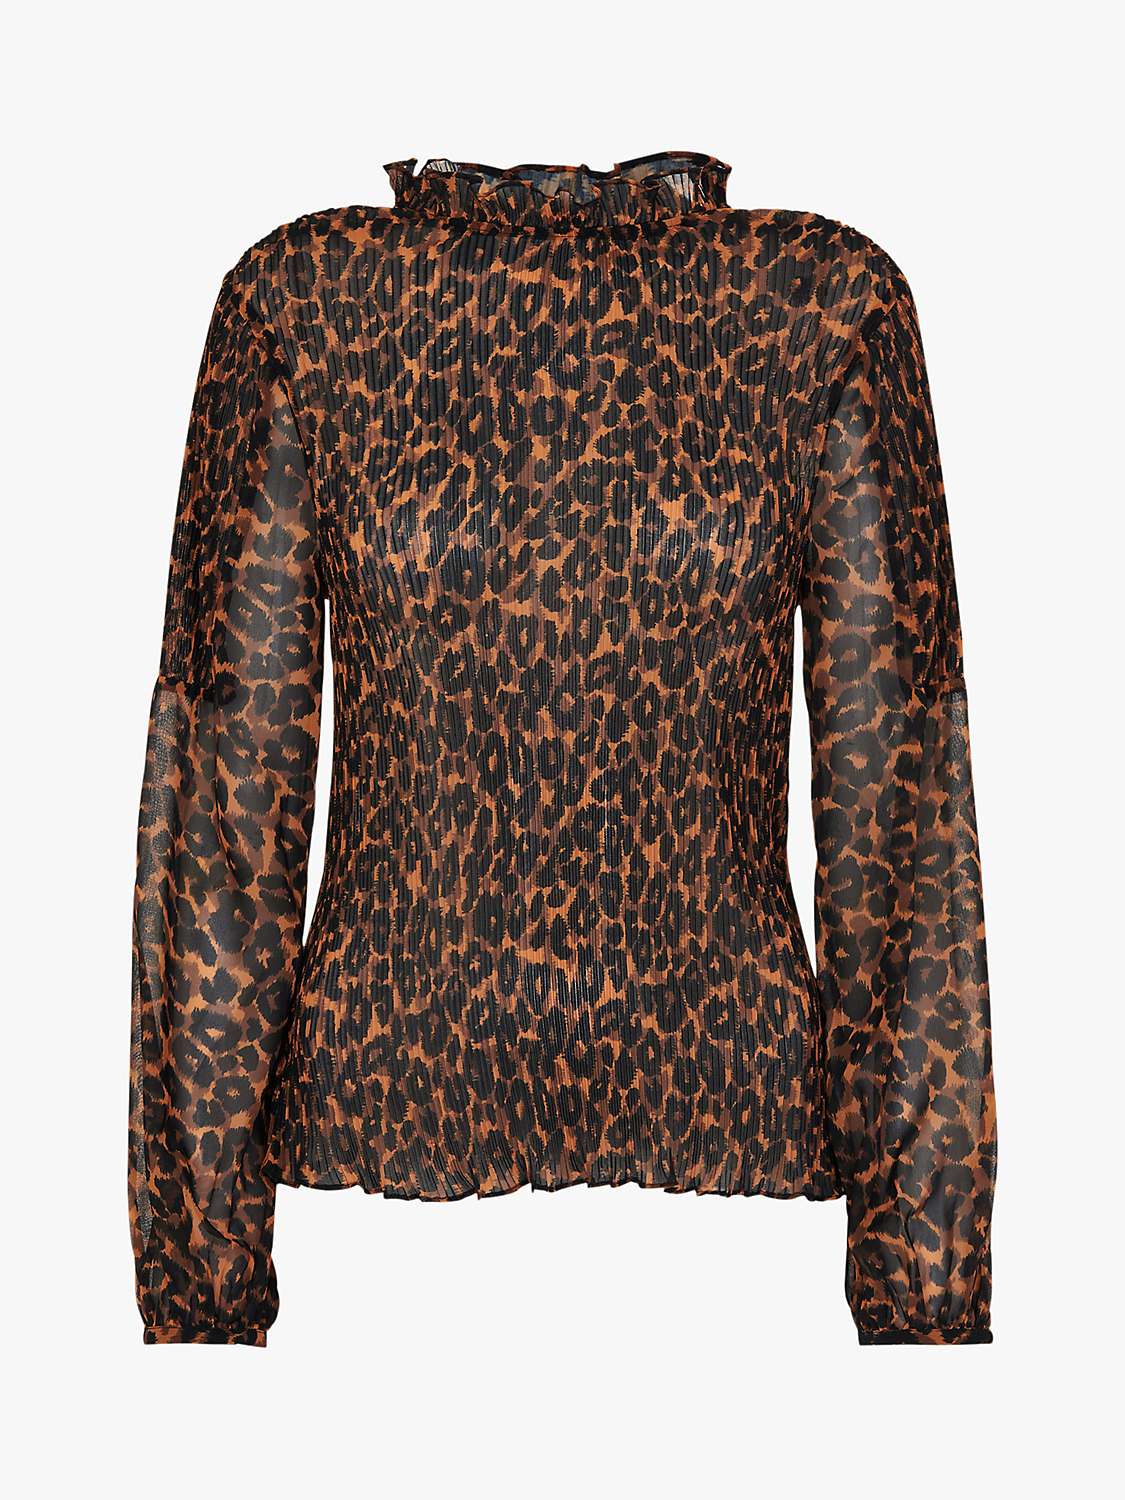 Buy Whistles Classic Leopard Plisse Top, Black/Yellow Online at johnlewis.com